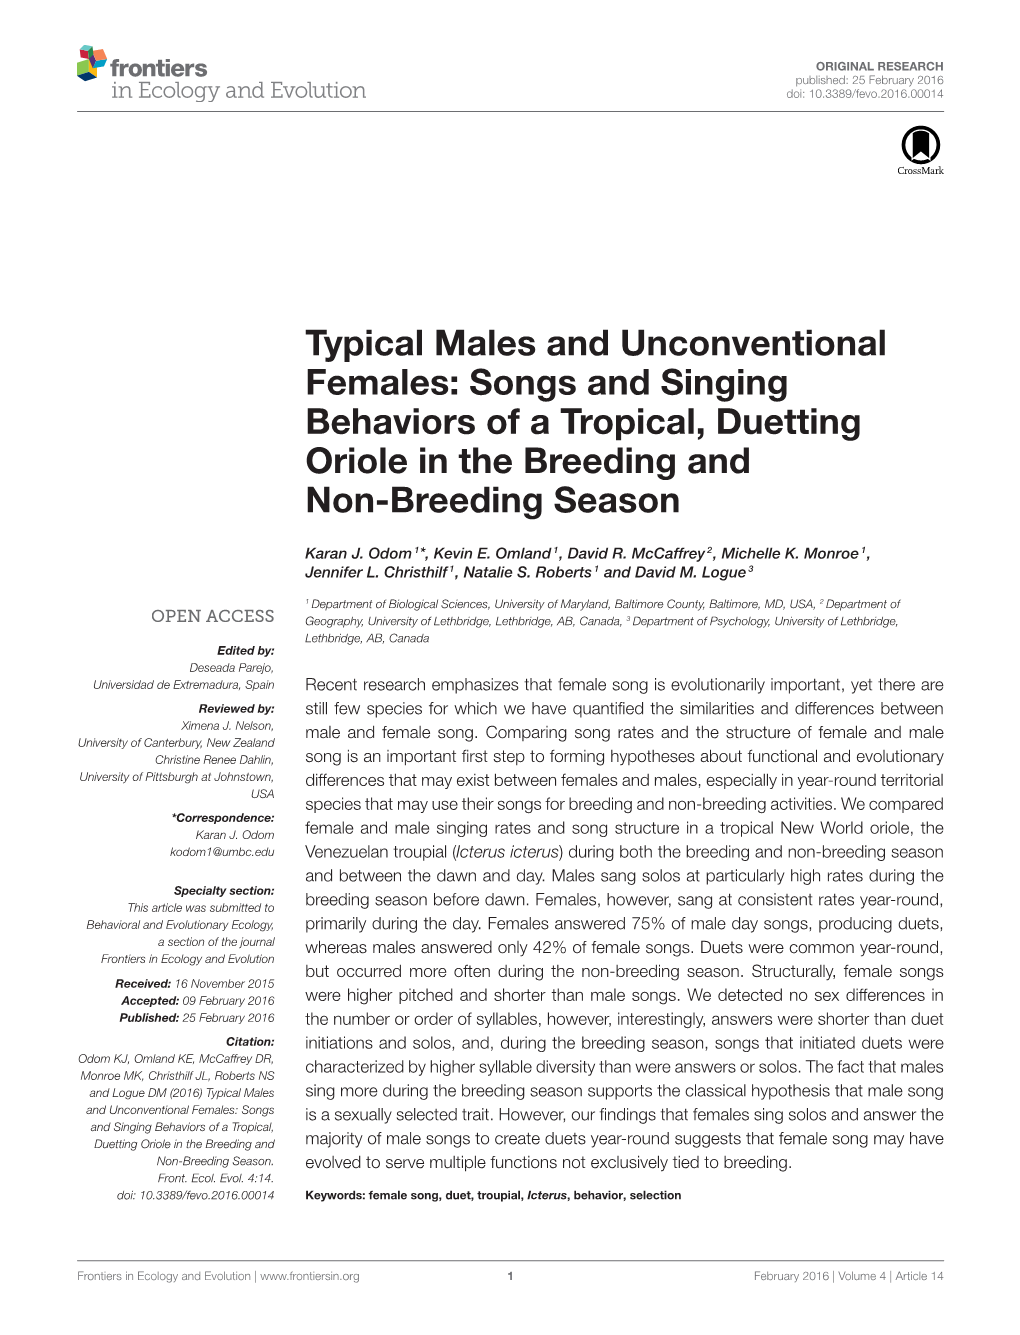 Typical Males and Unconventional Females: Songs and Singing Behaviors of a Tropical, Duetting Oriole in the Breeding and Non-Breeding Season